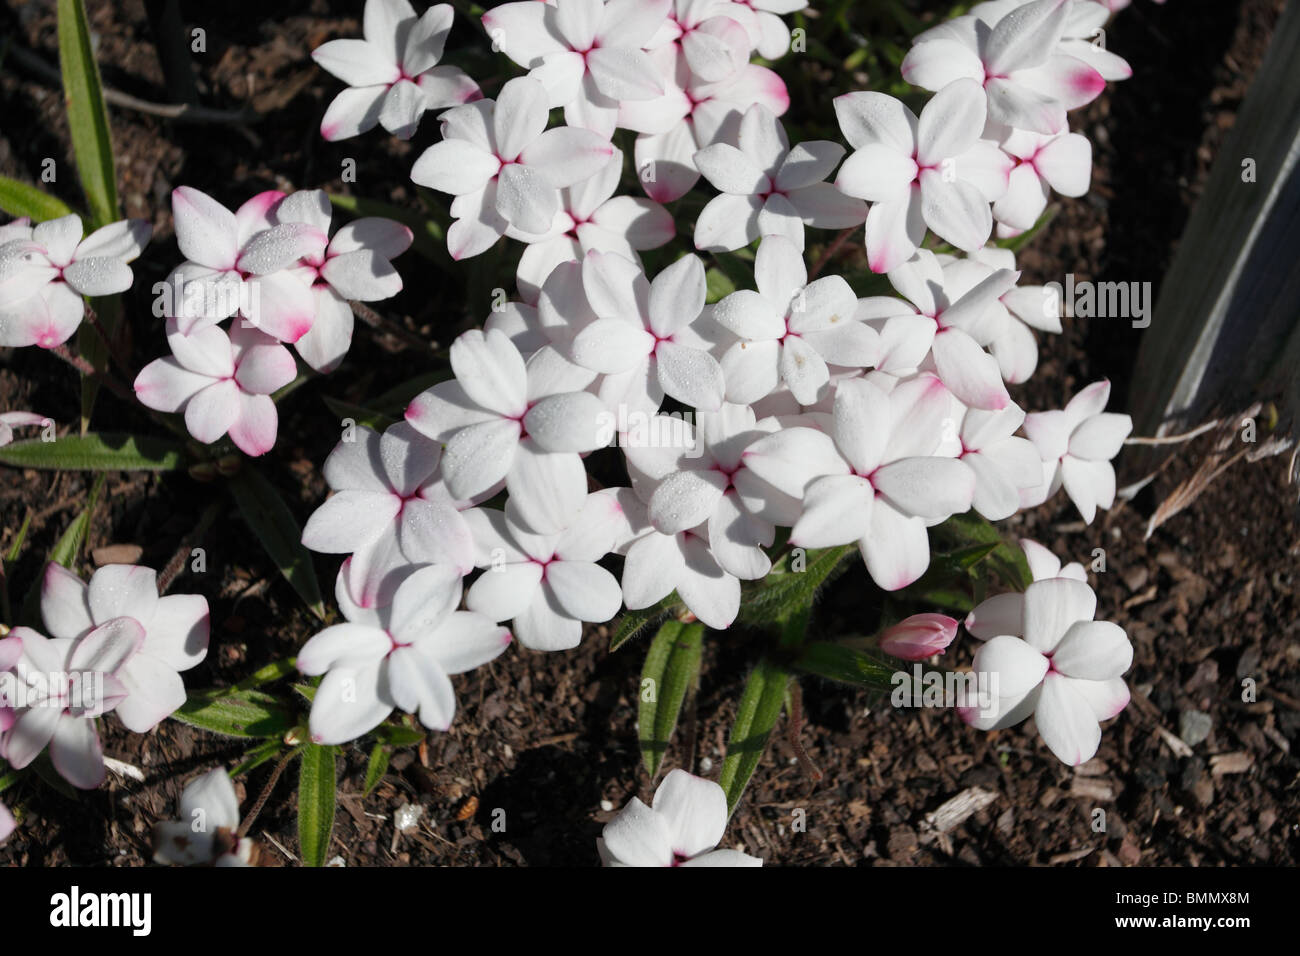 Rhodohypoxis picta close up of flowers Stock Photo